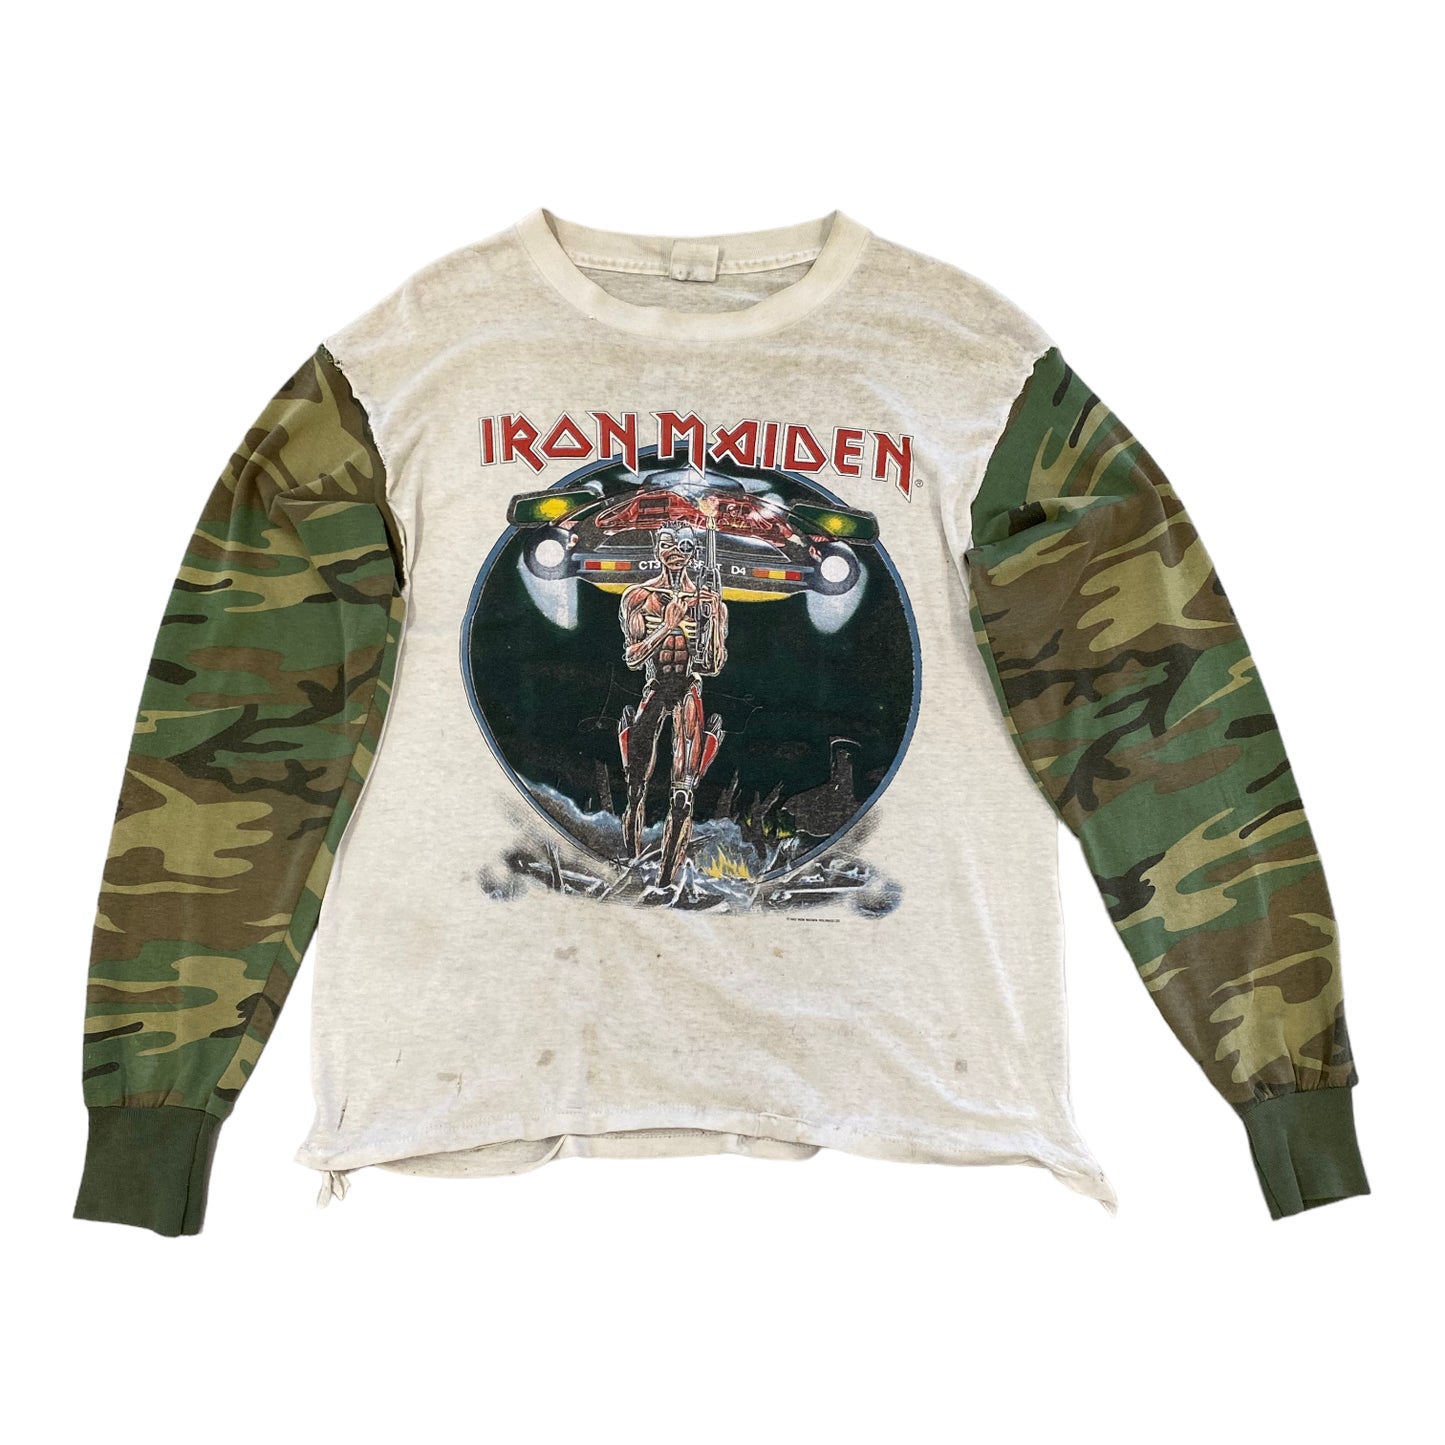 1987 Iron Maiden Vintage White Tee with Long-sleeved Army Print Official Band Tee